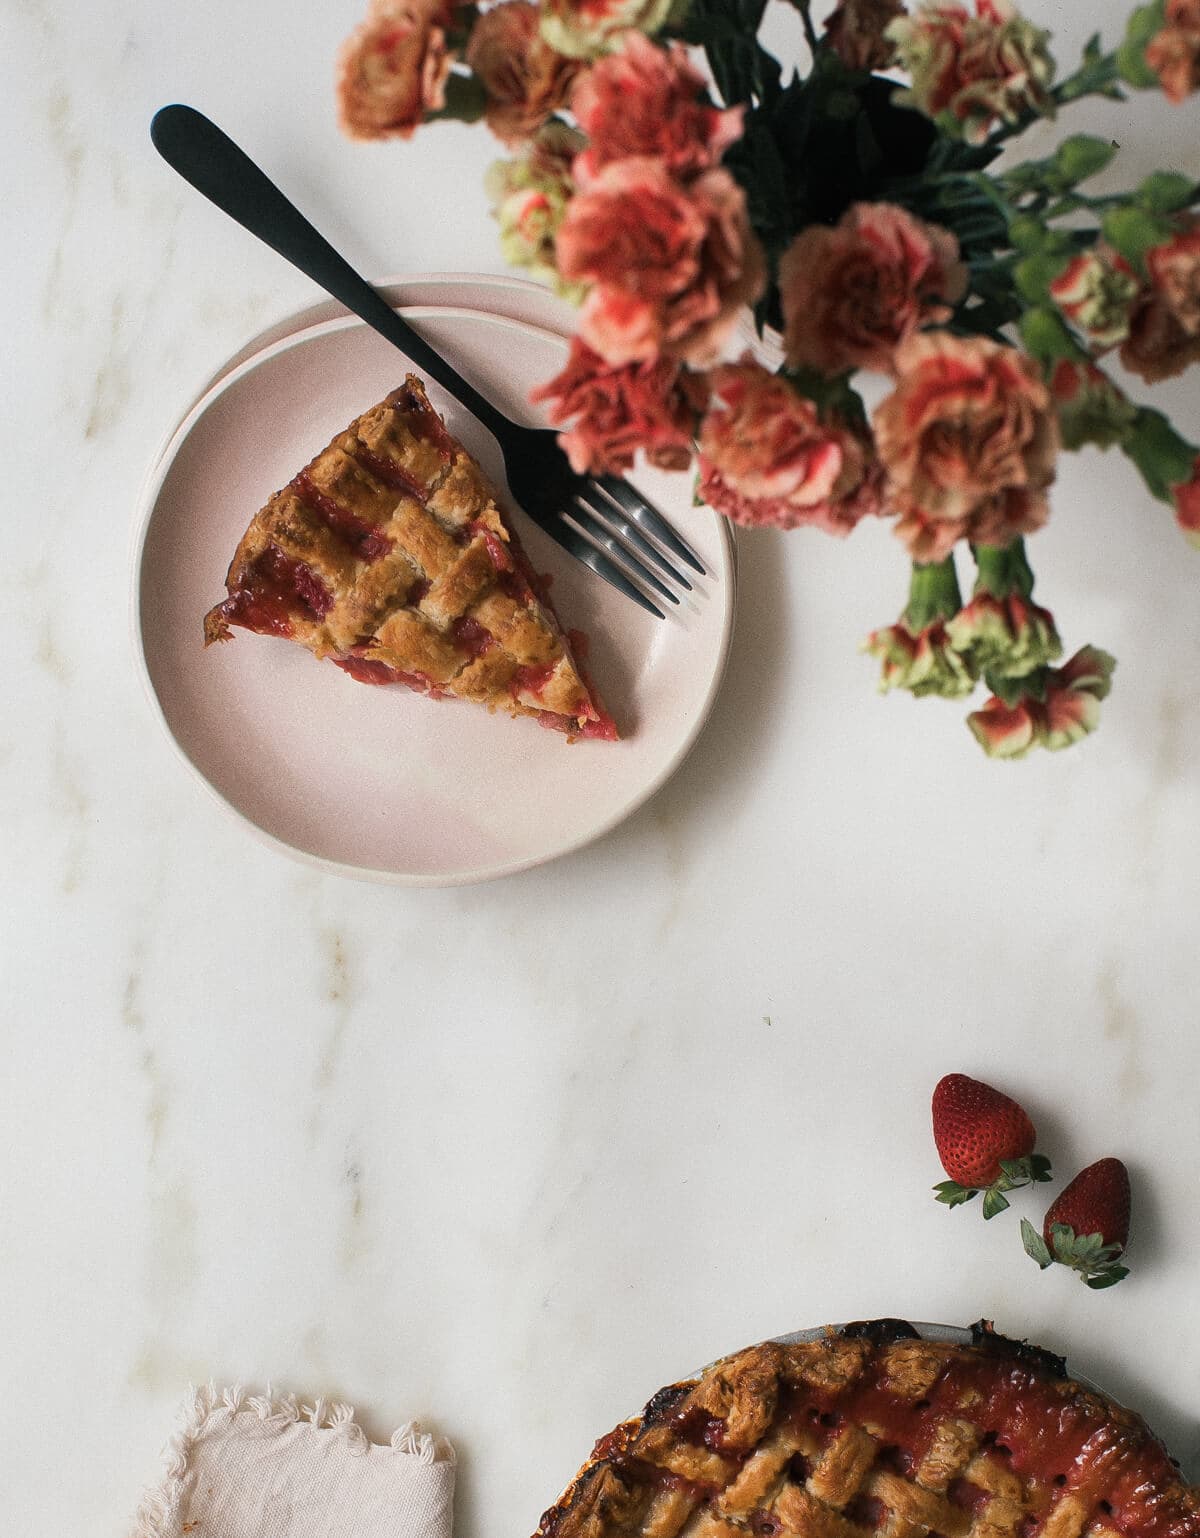 Overhead image of a slice of rhubarb strawberry pie on a plate with a fork and flowers near by.